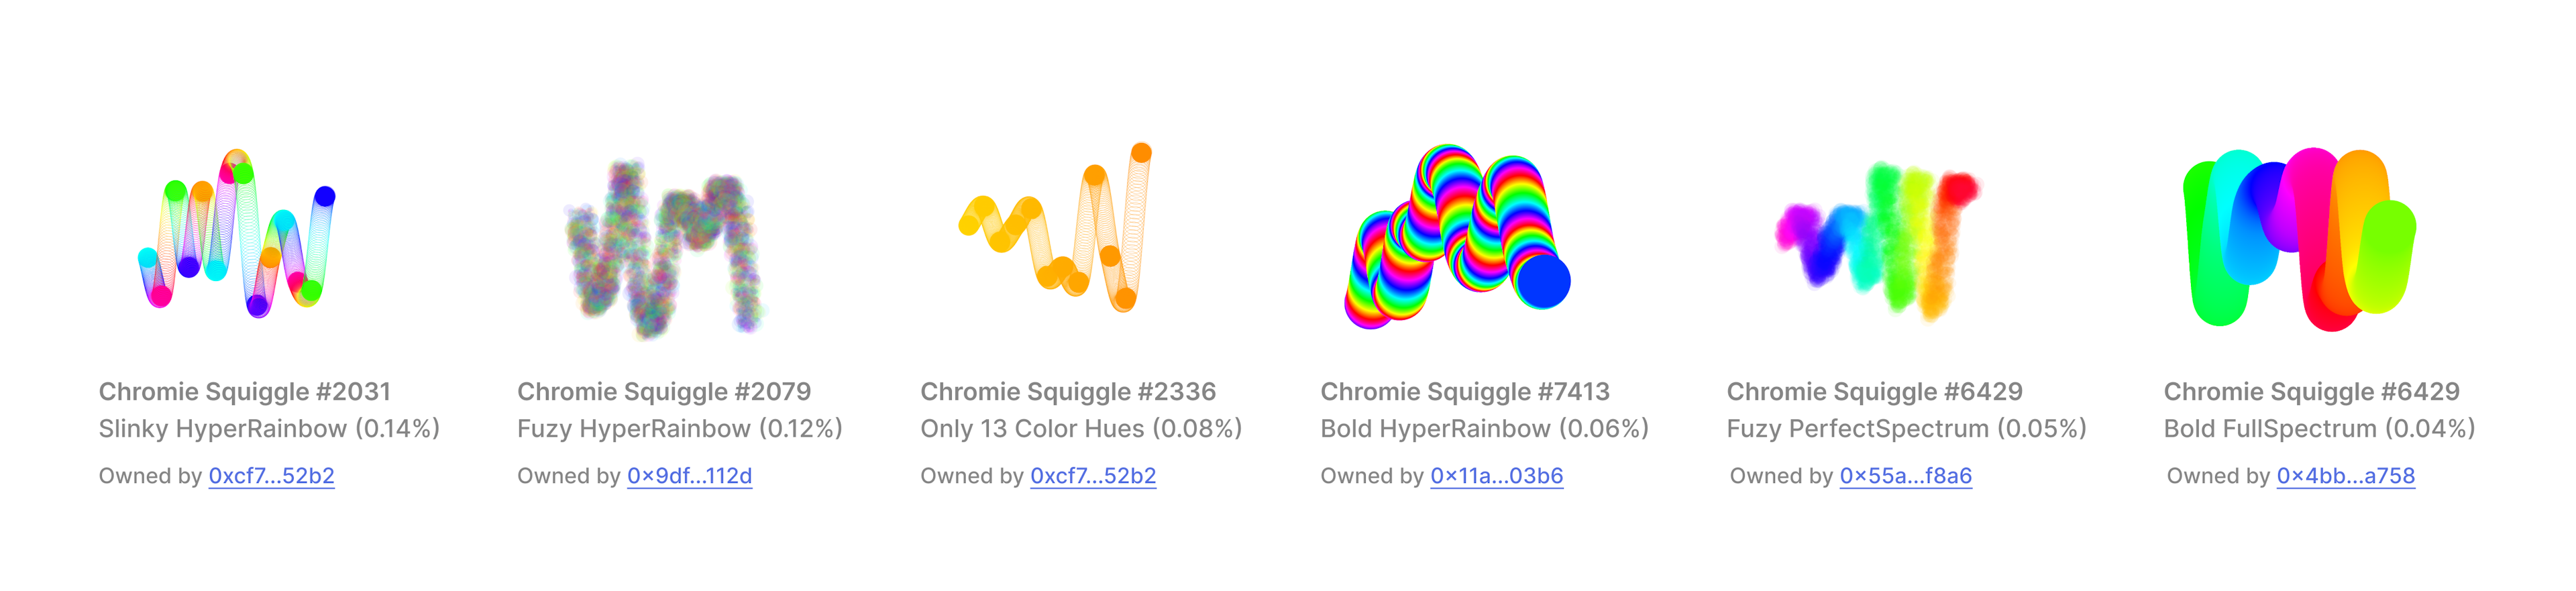 Incredibly Rare Chromie Squiggles